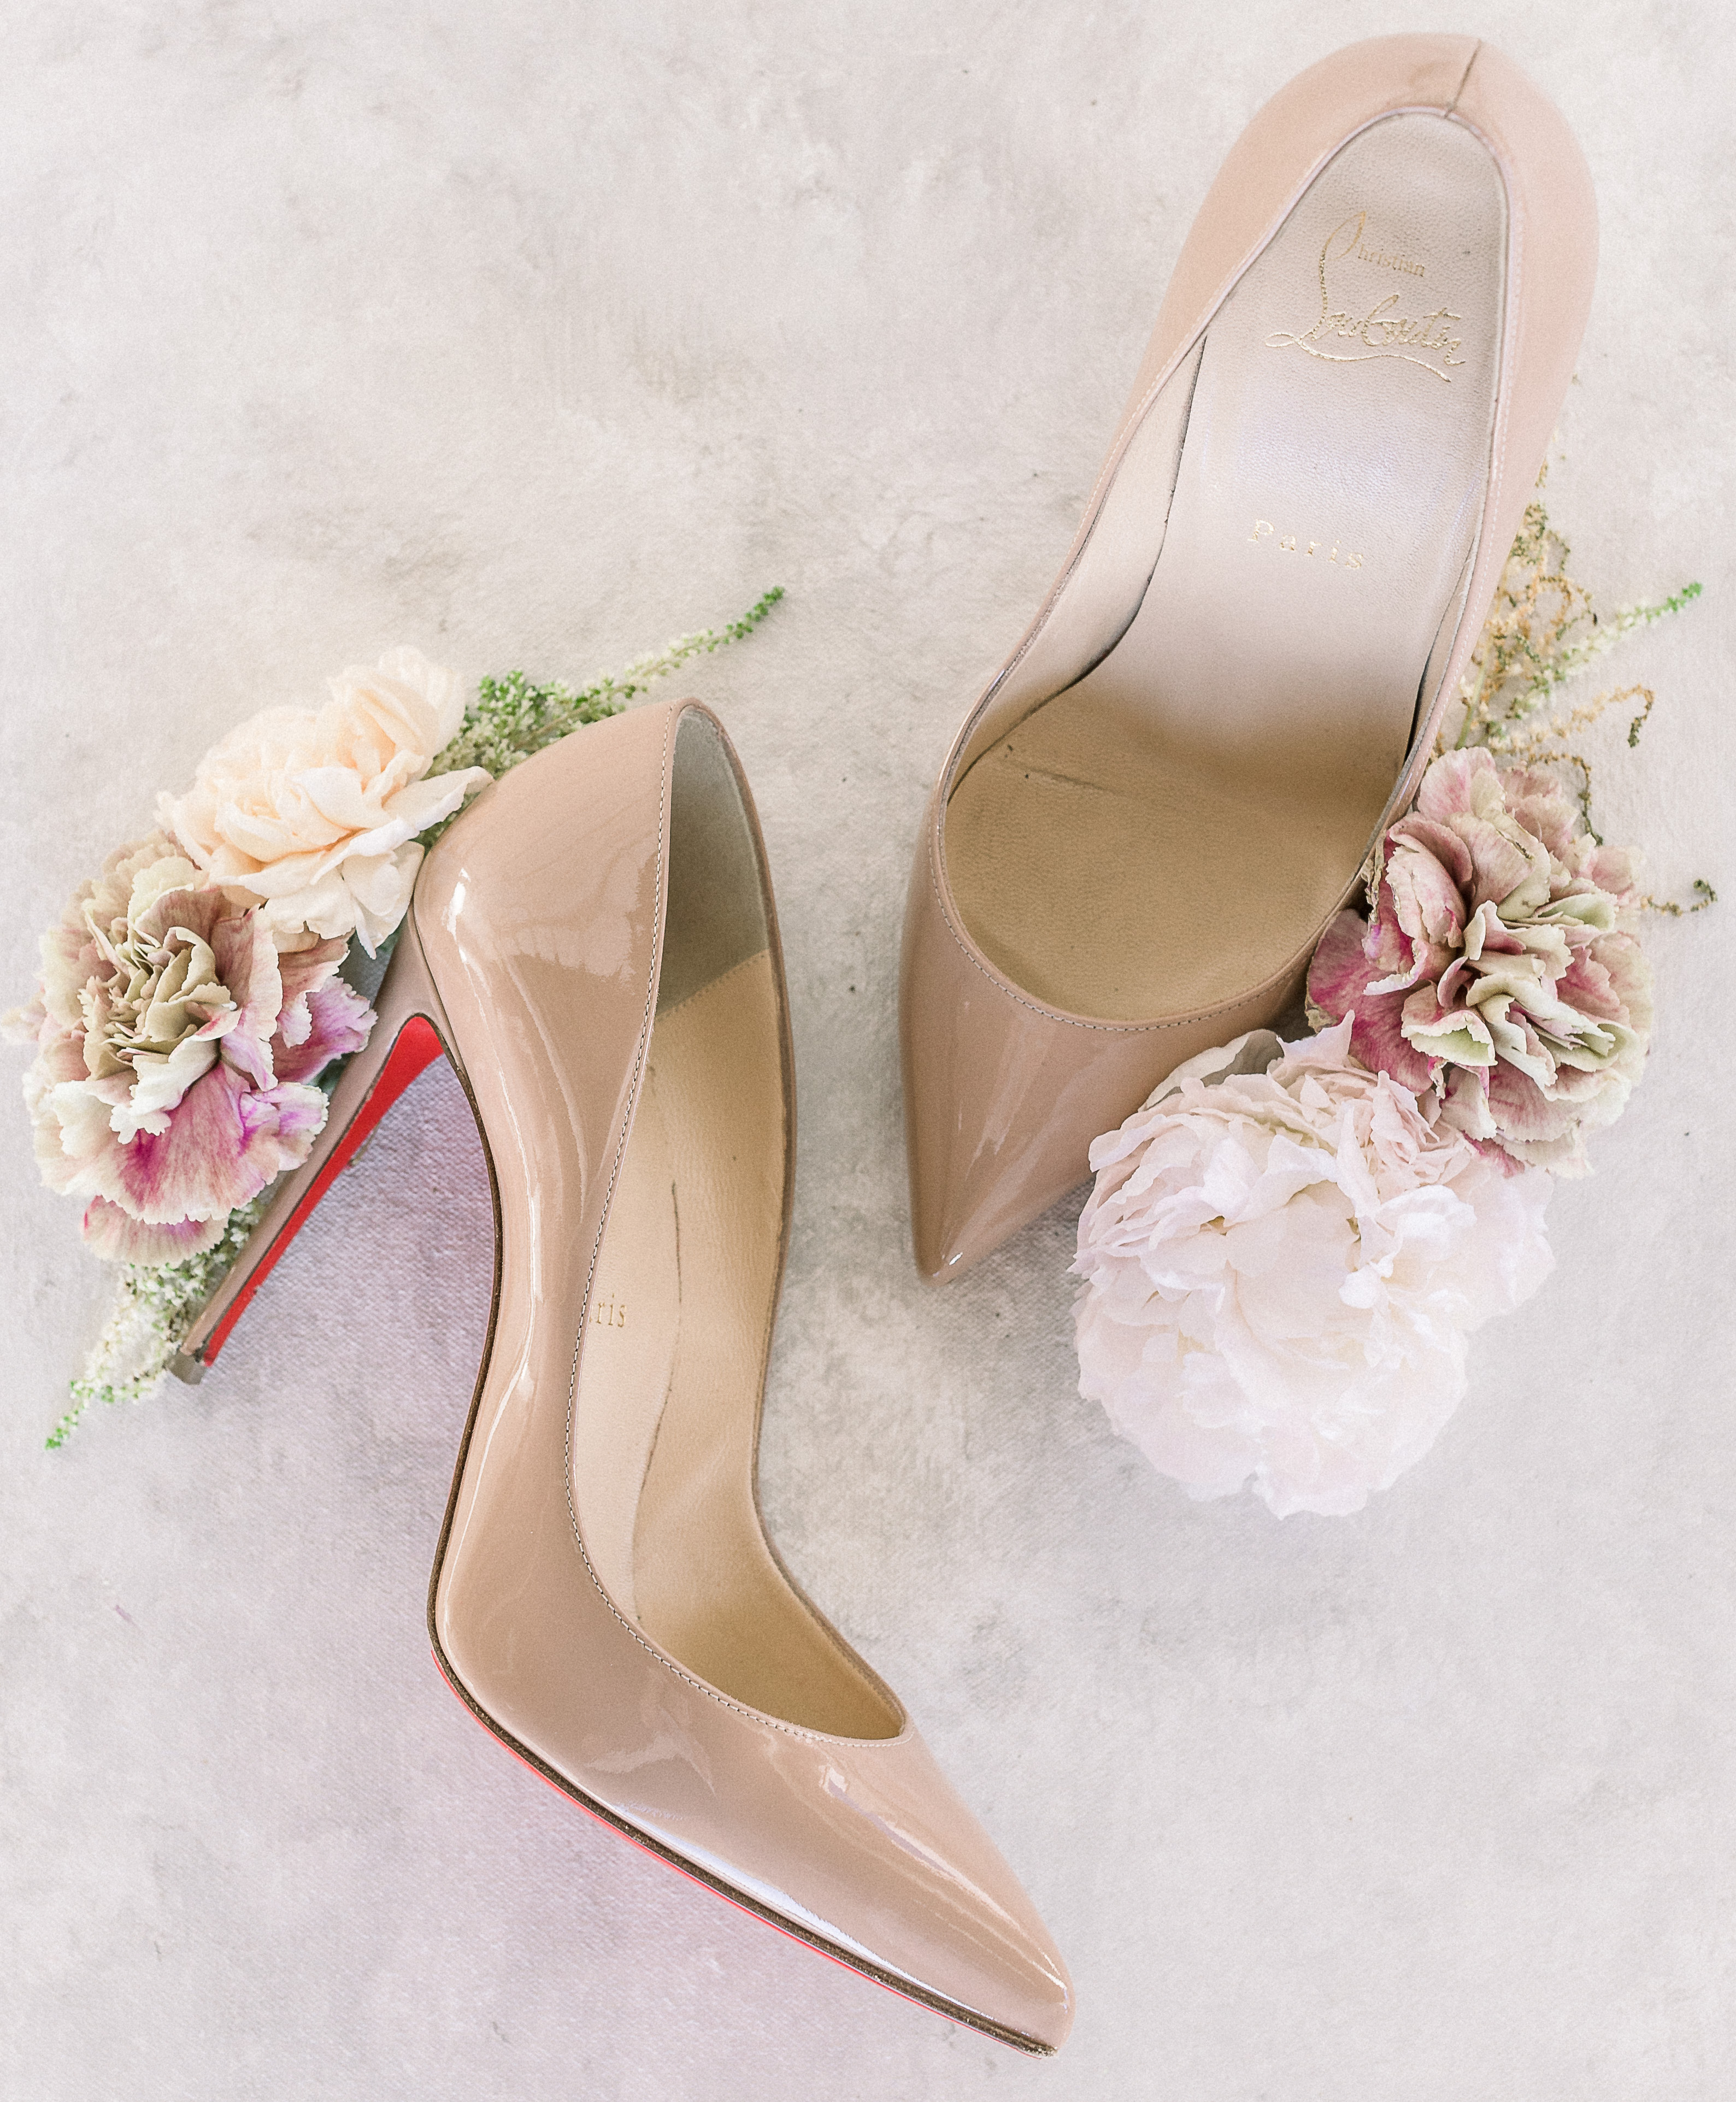 A nude pair of Christian Louboutin pumps are decorated with mauve pink and white flowers on the heels.